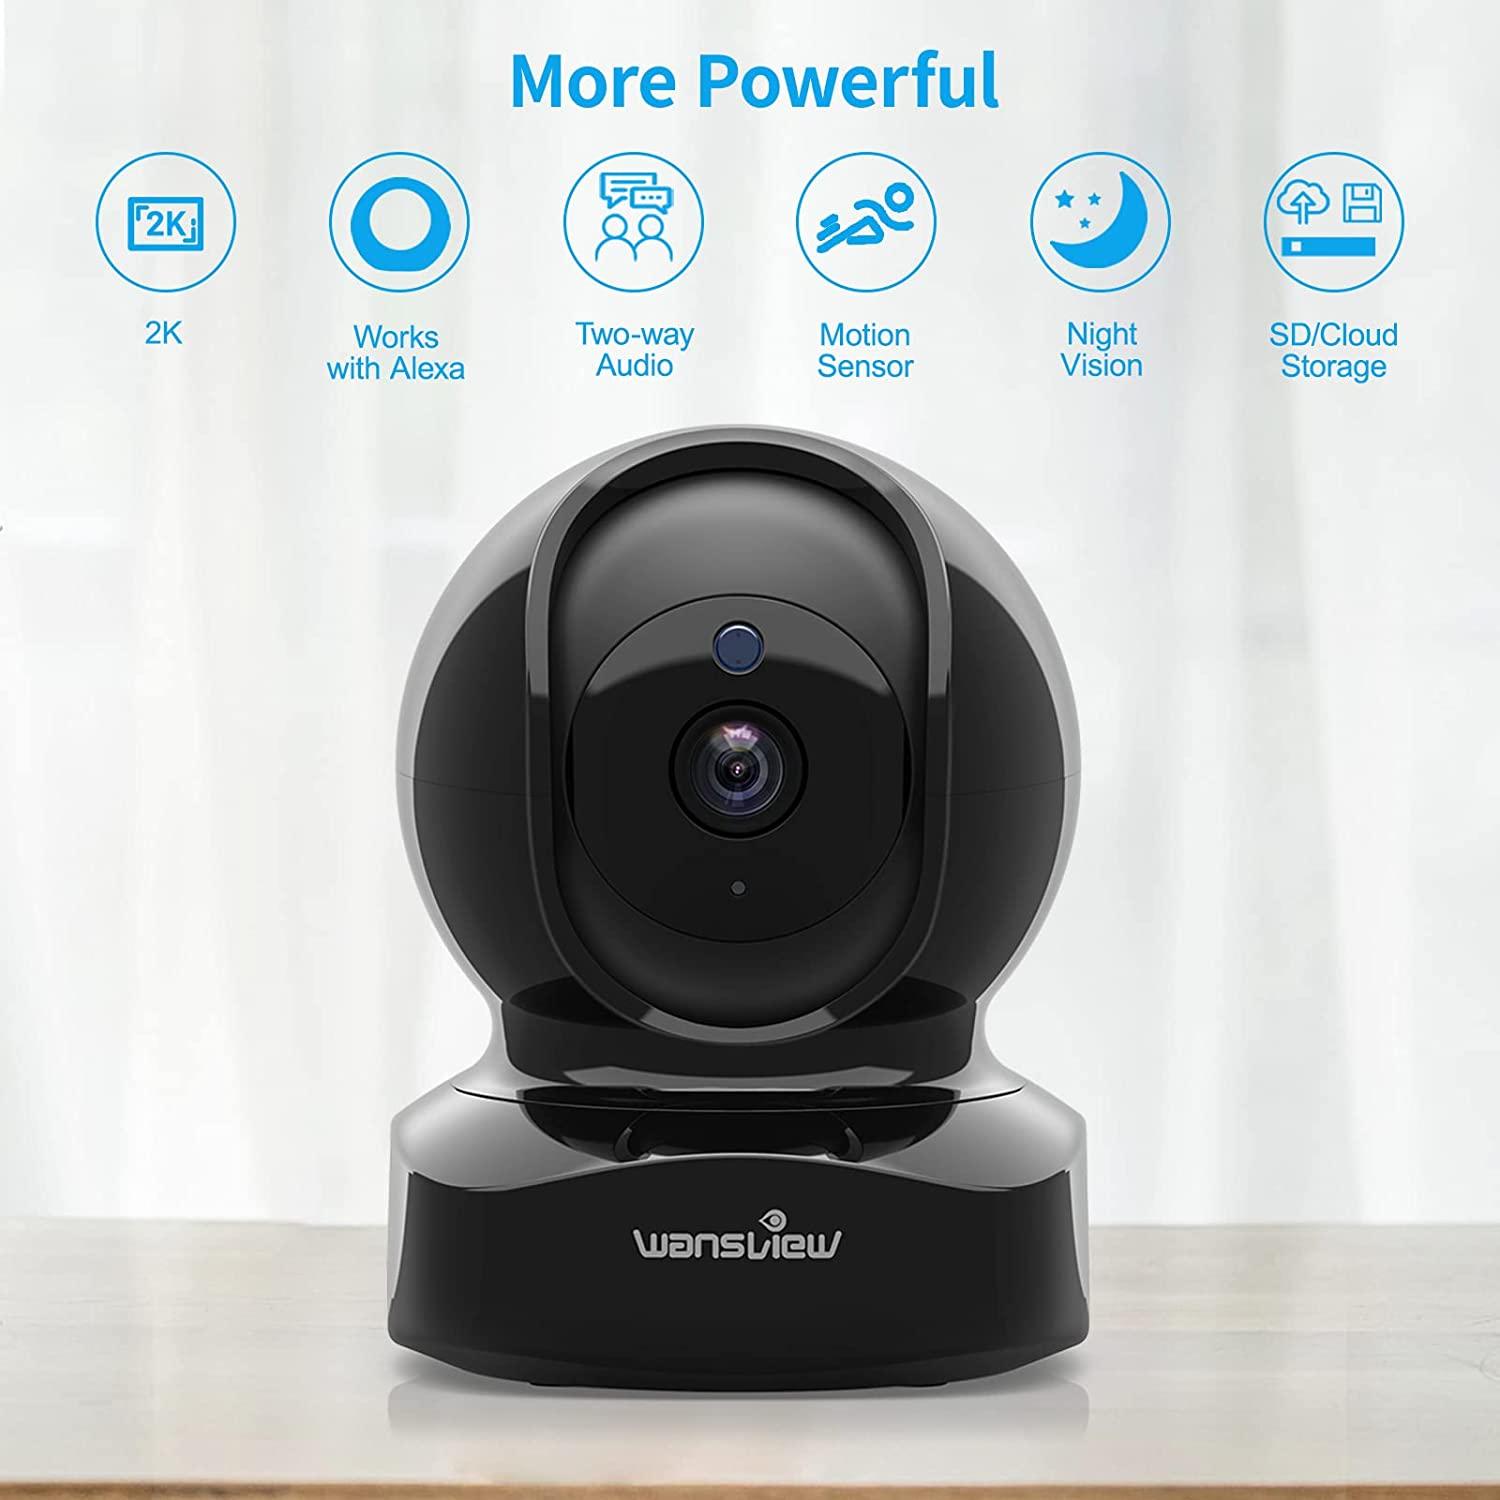 wansview Wireless Security Camera, IP Camera 2K, WiFi Home Indoor Camera  for Baby/Pet/Nanny, 2 Way Audio Night Vision, Works with Alexa, with TF  Card Slot and Cloud Black